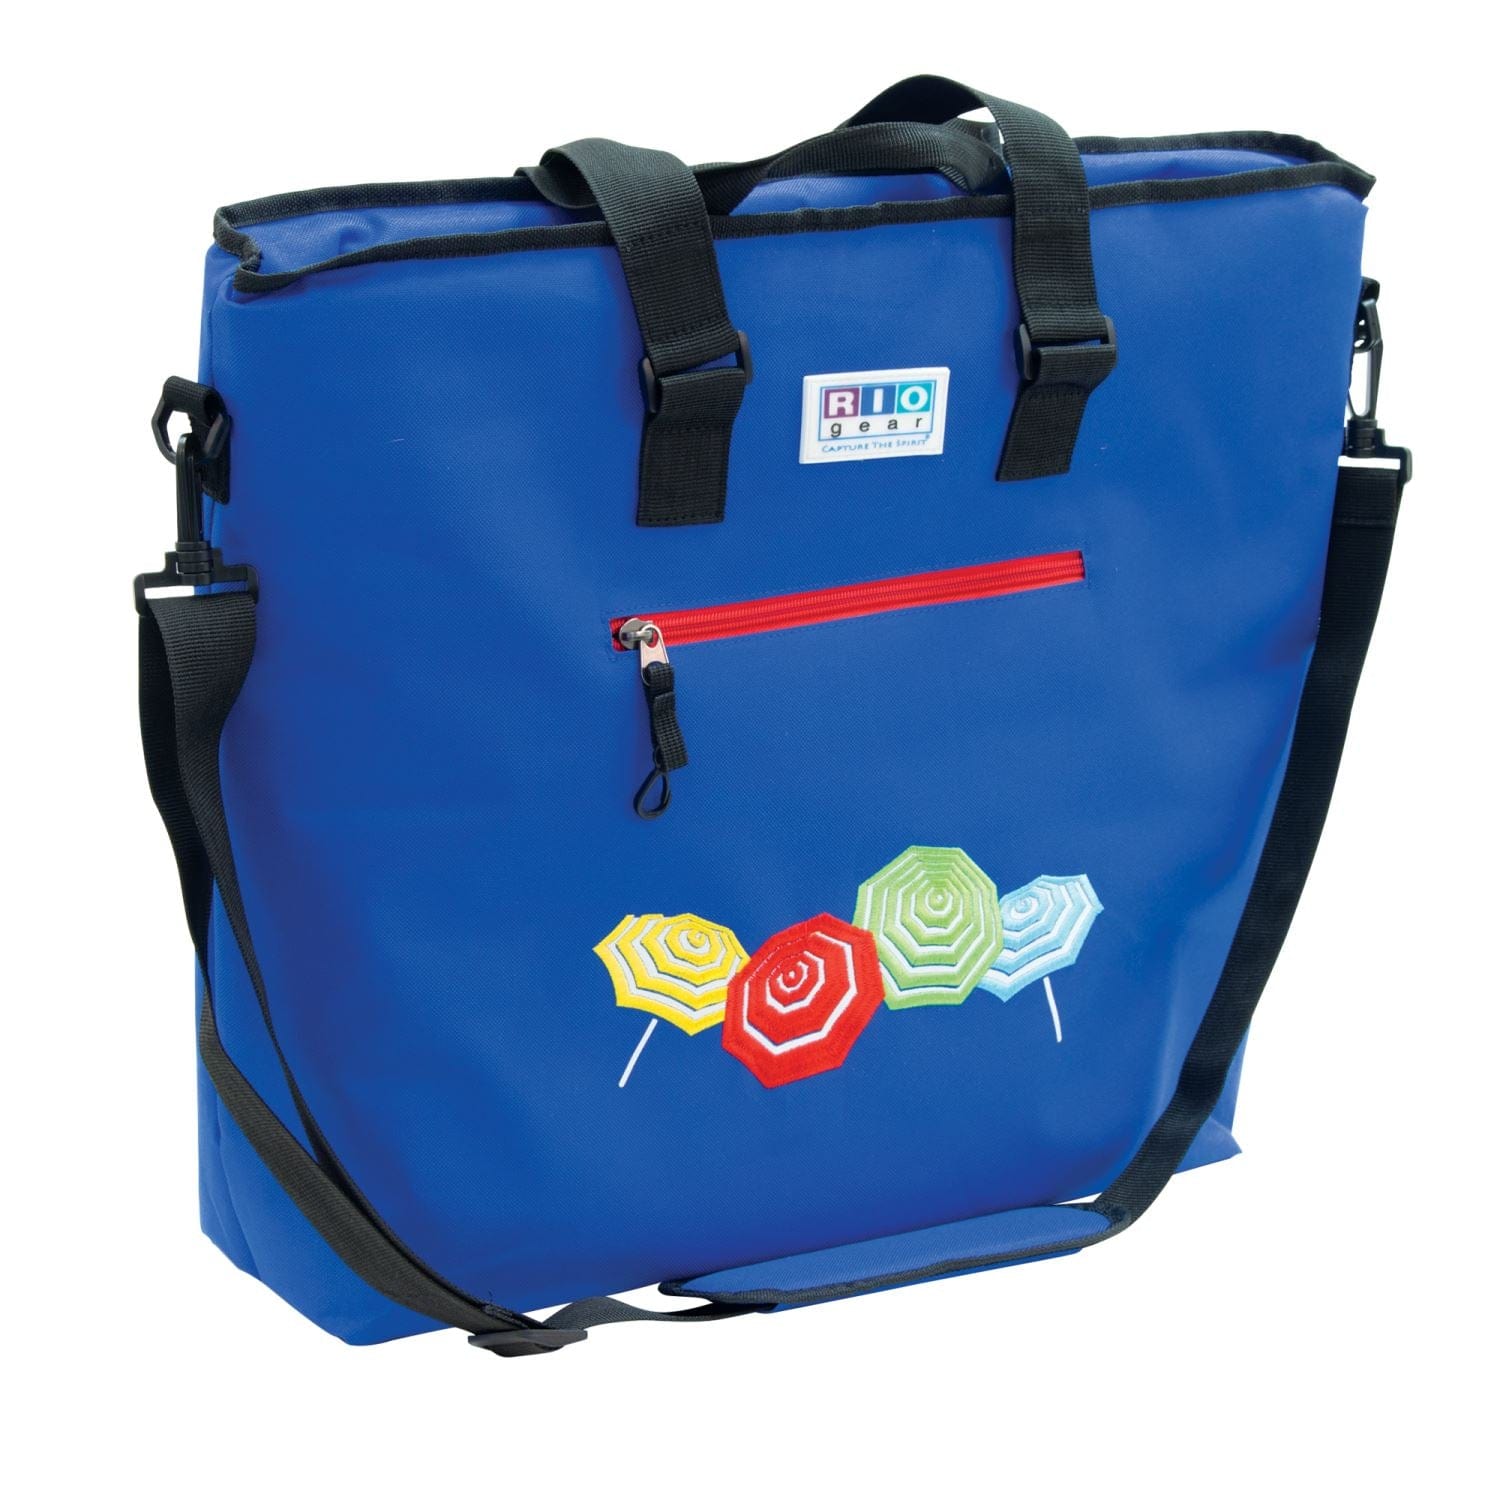 RIO Insulated Bags RIO Gear | Deluxe Insulated Tote Bag with Bottle Opener - Blue CT777-46-1